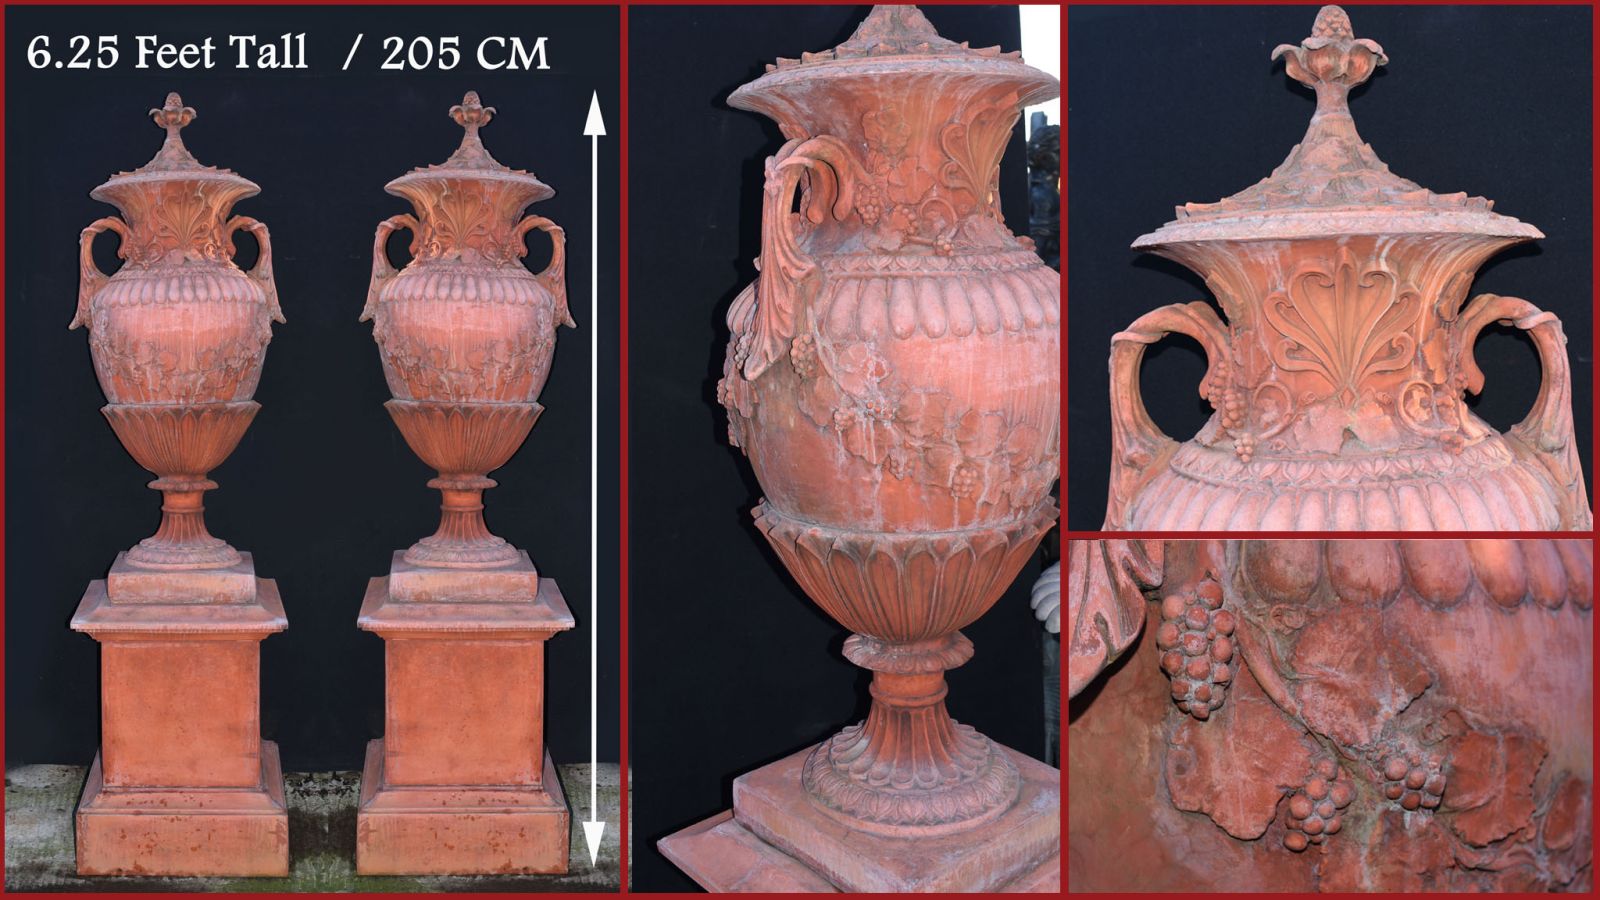 Pair Large English Terracotta Garden Urns Architectural Antiques